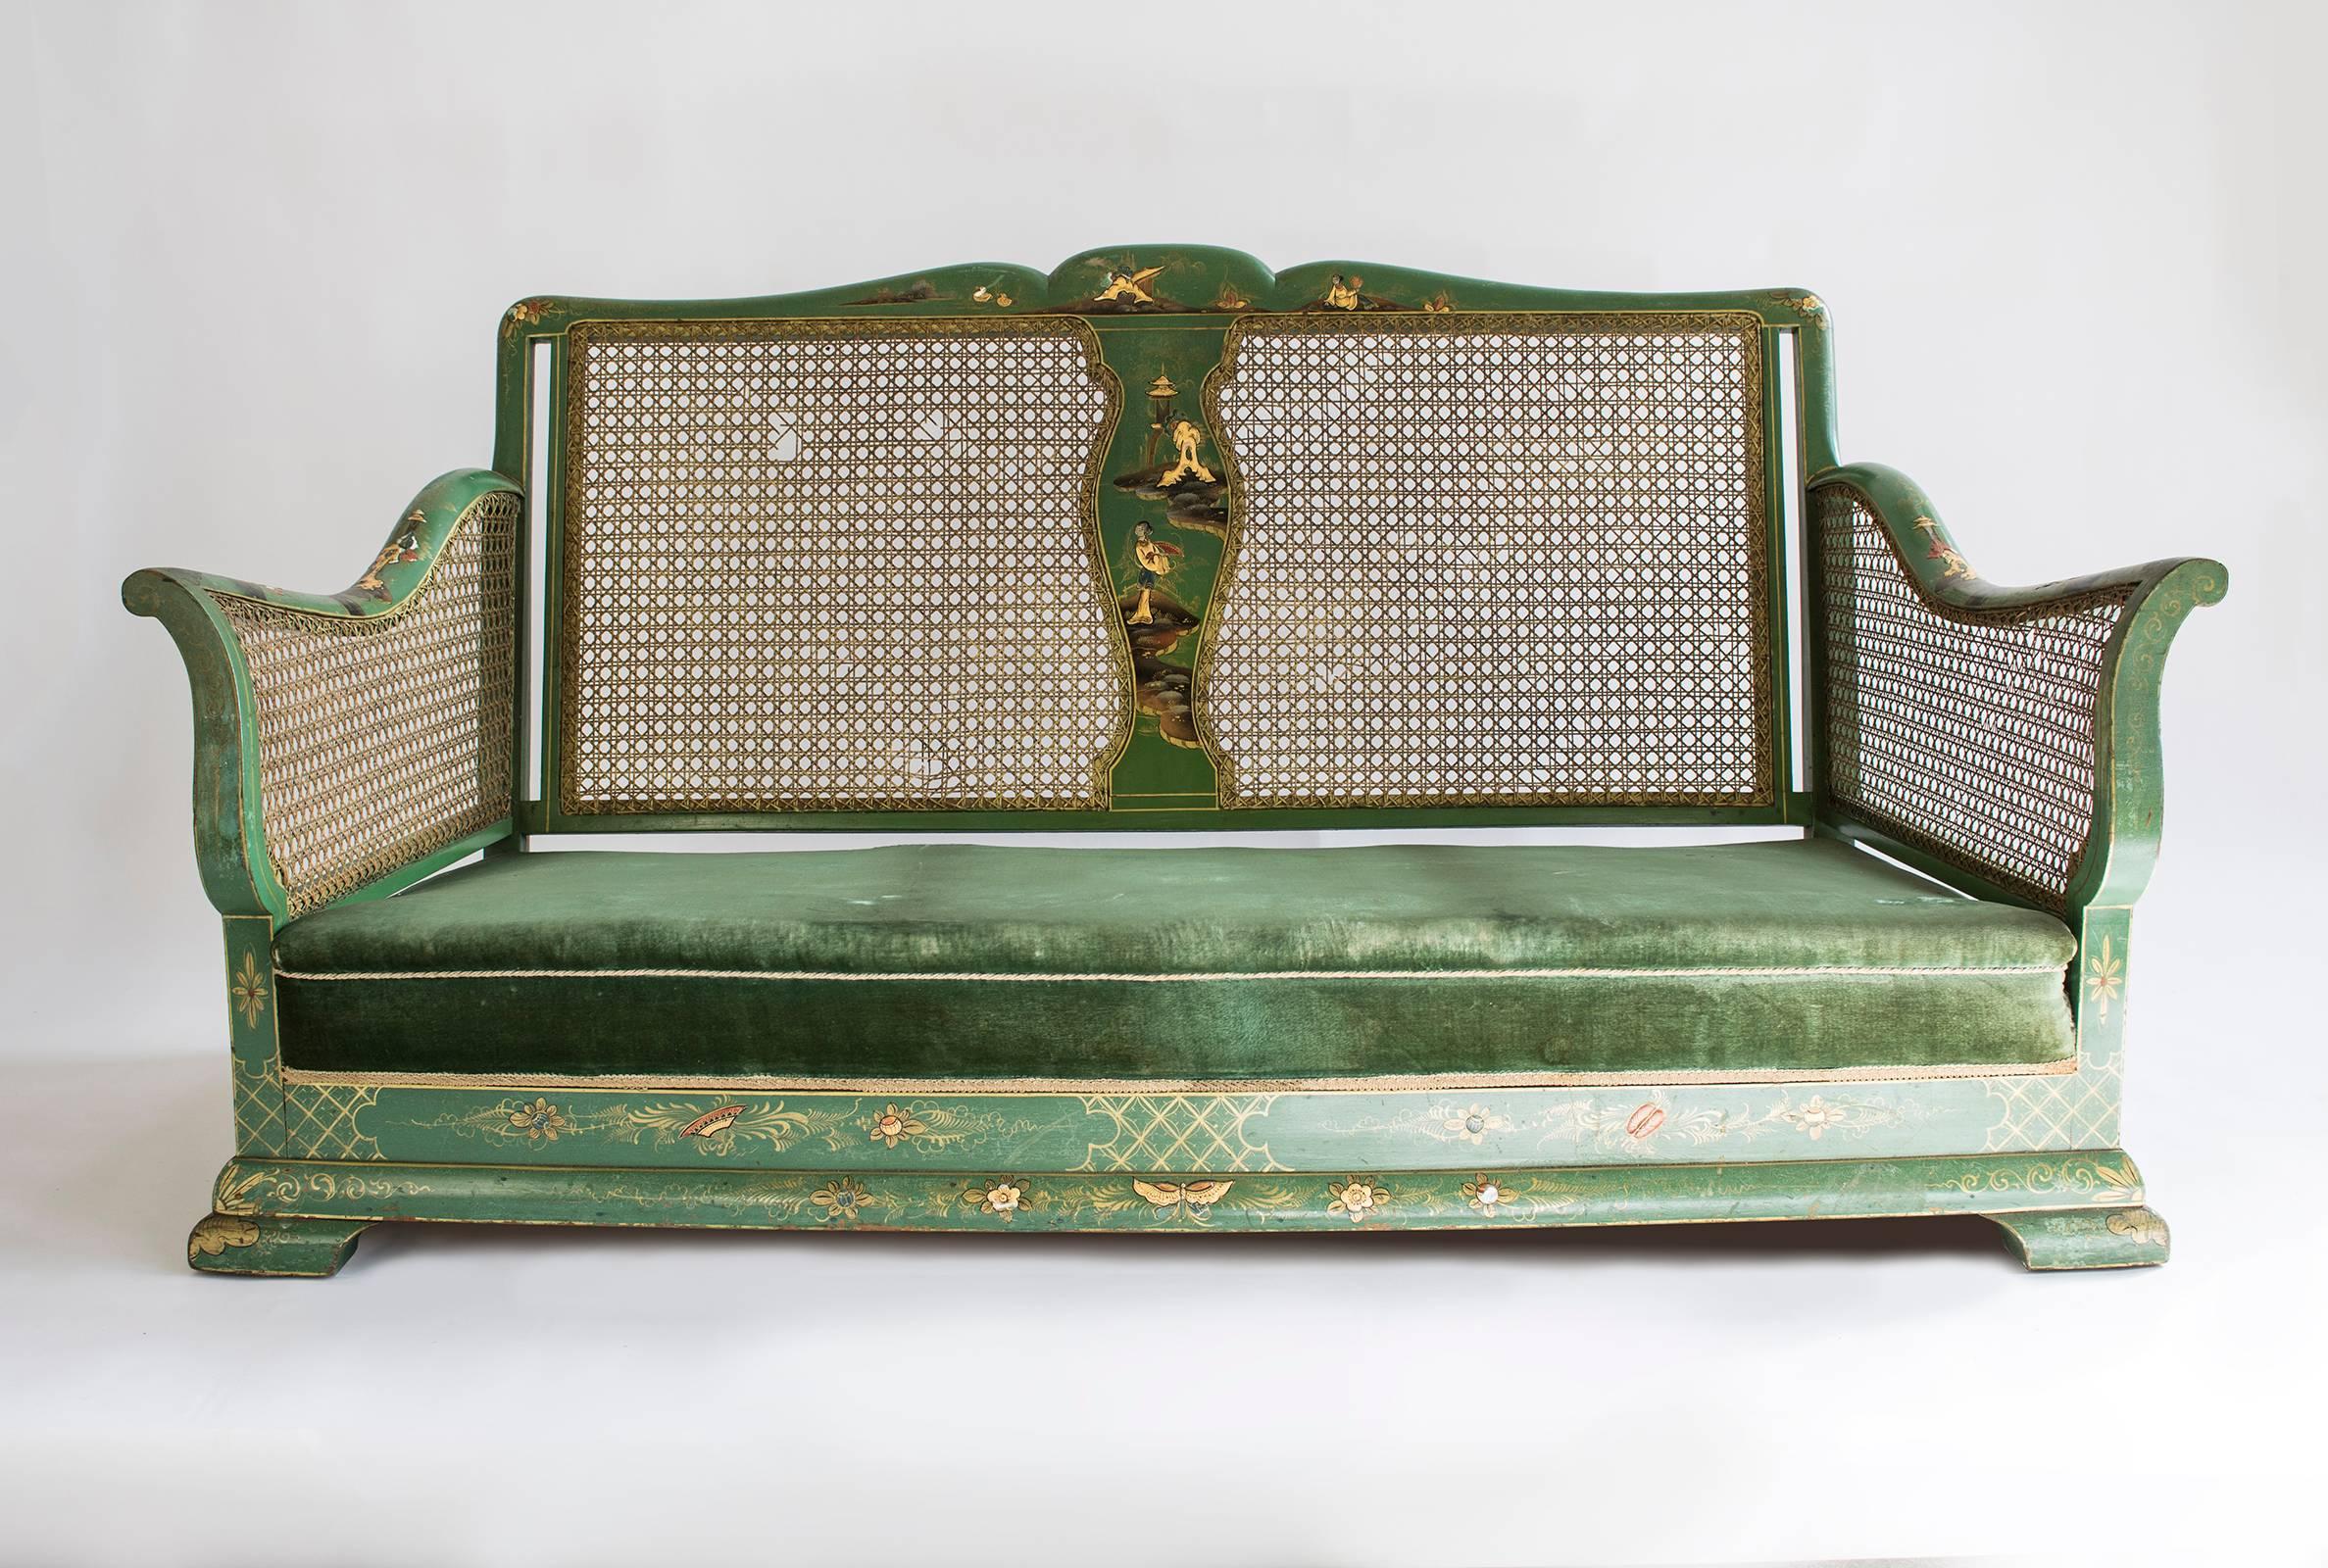 An early 20th century green chinoiserie lacquered bergère suite, comprising three-seat sofa and a pair of armchairs, the raised decoration heightened in gilt, with cane inset panels,

Measure: Armchairs 85 x 72 x 72 cm
Sofa 165 x 86 x 80 cm.